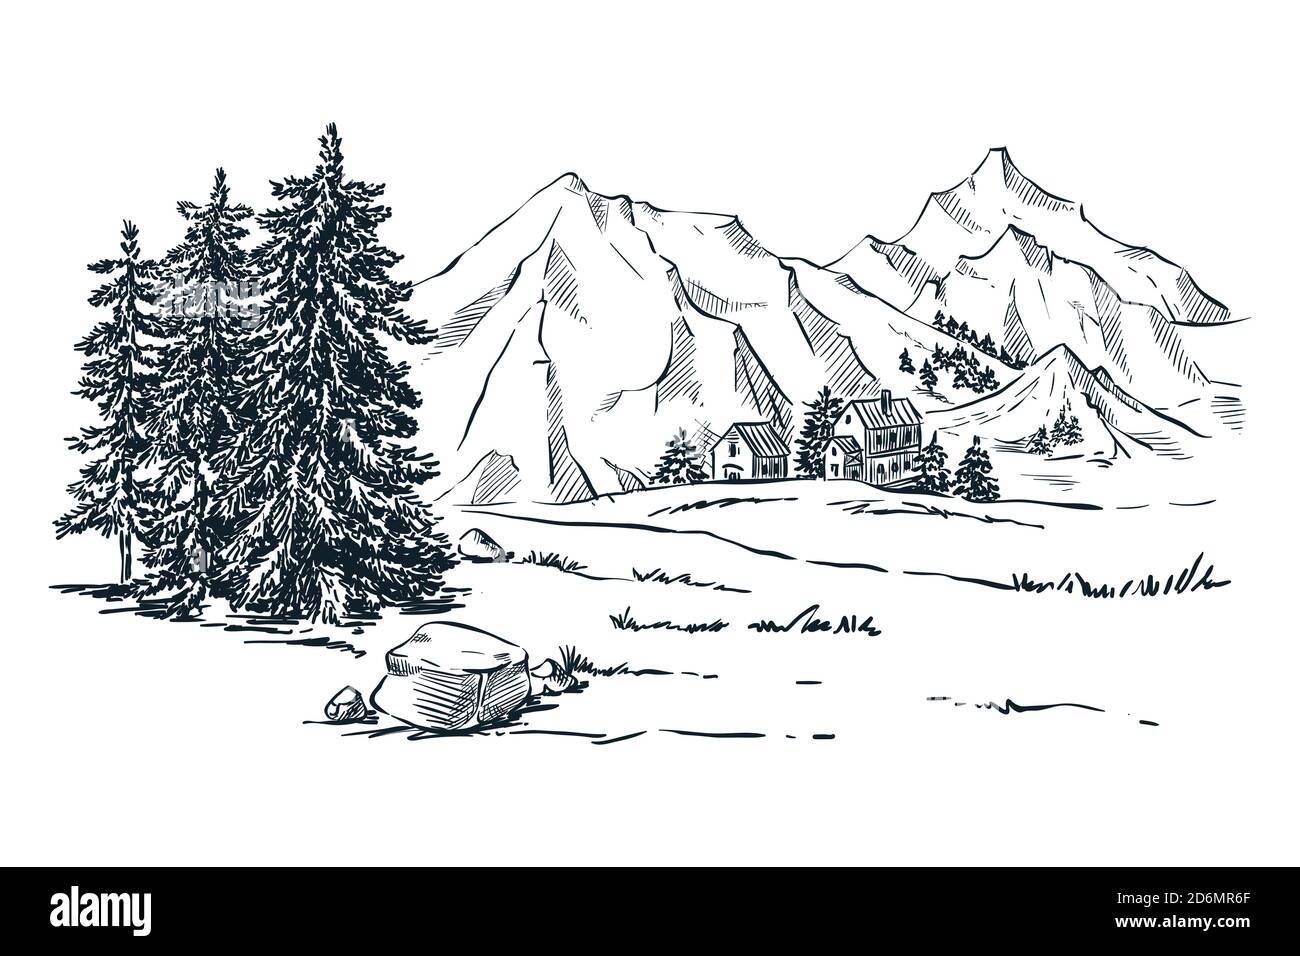 Mountains, spruce and pine trees landscape, vector sketch illustration. Hand drawn winter hills and forest. Travel, outdoor hiking concept. Stock Vector